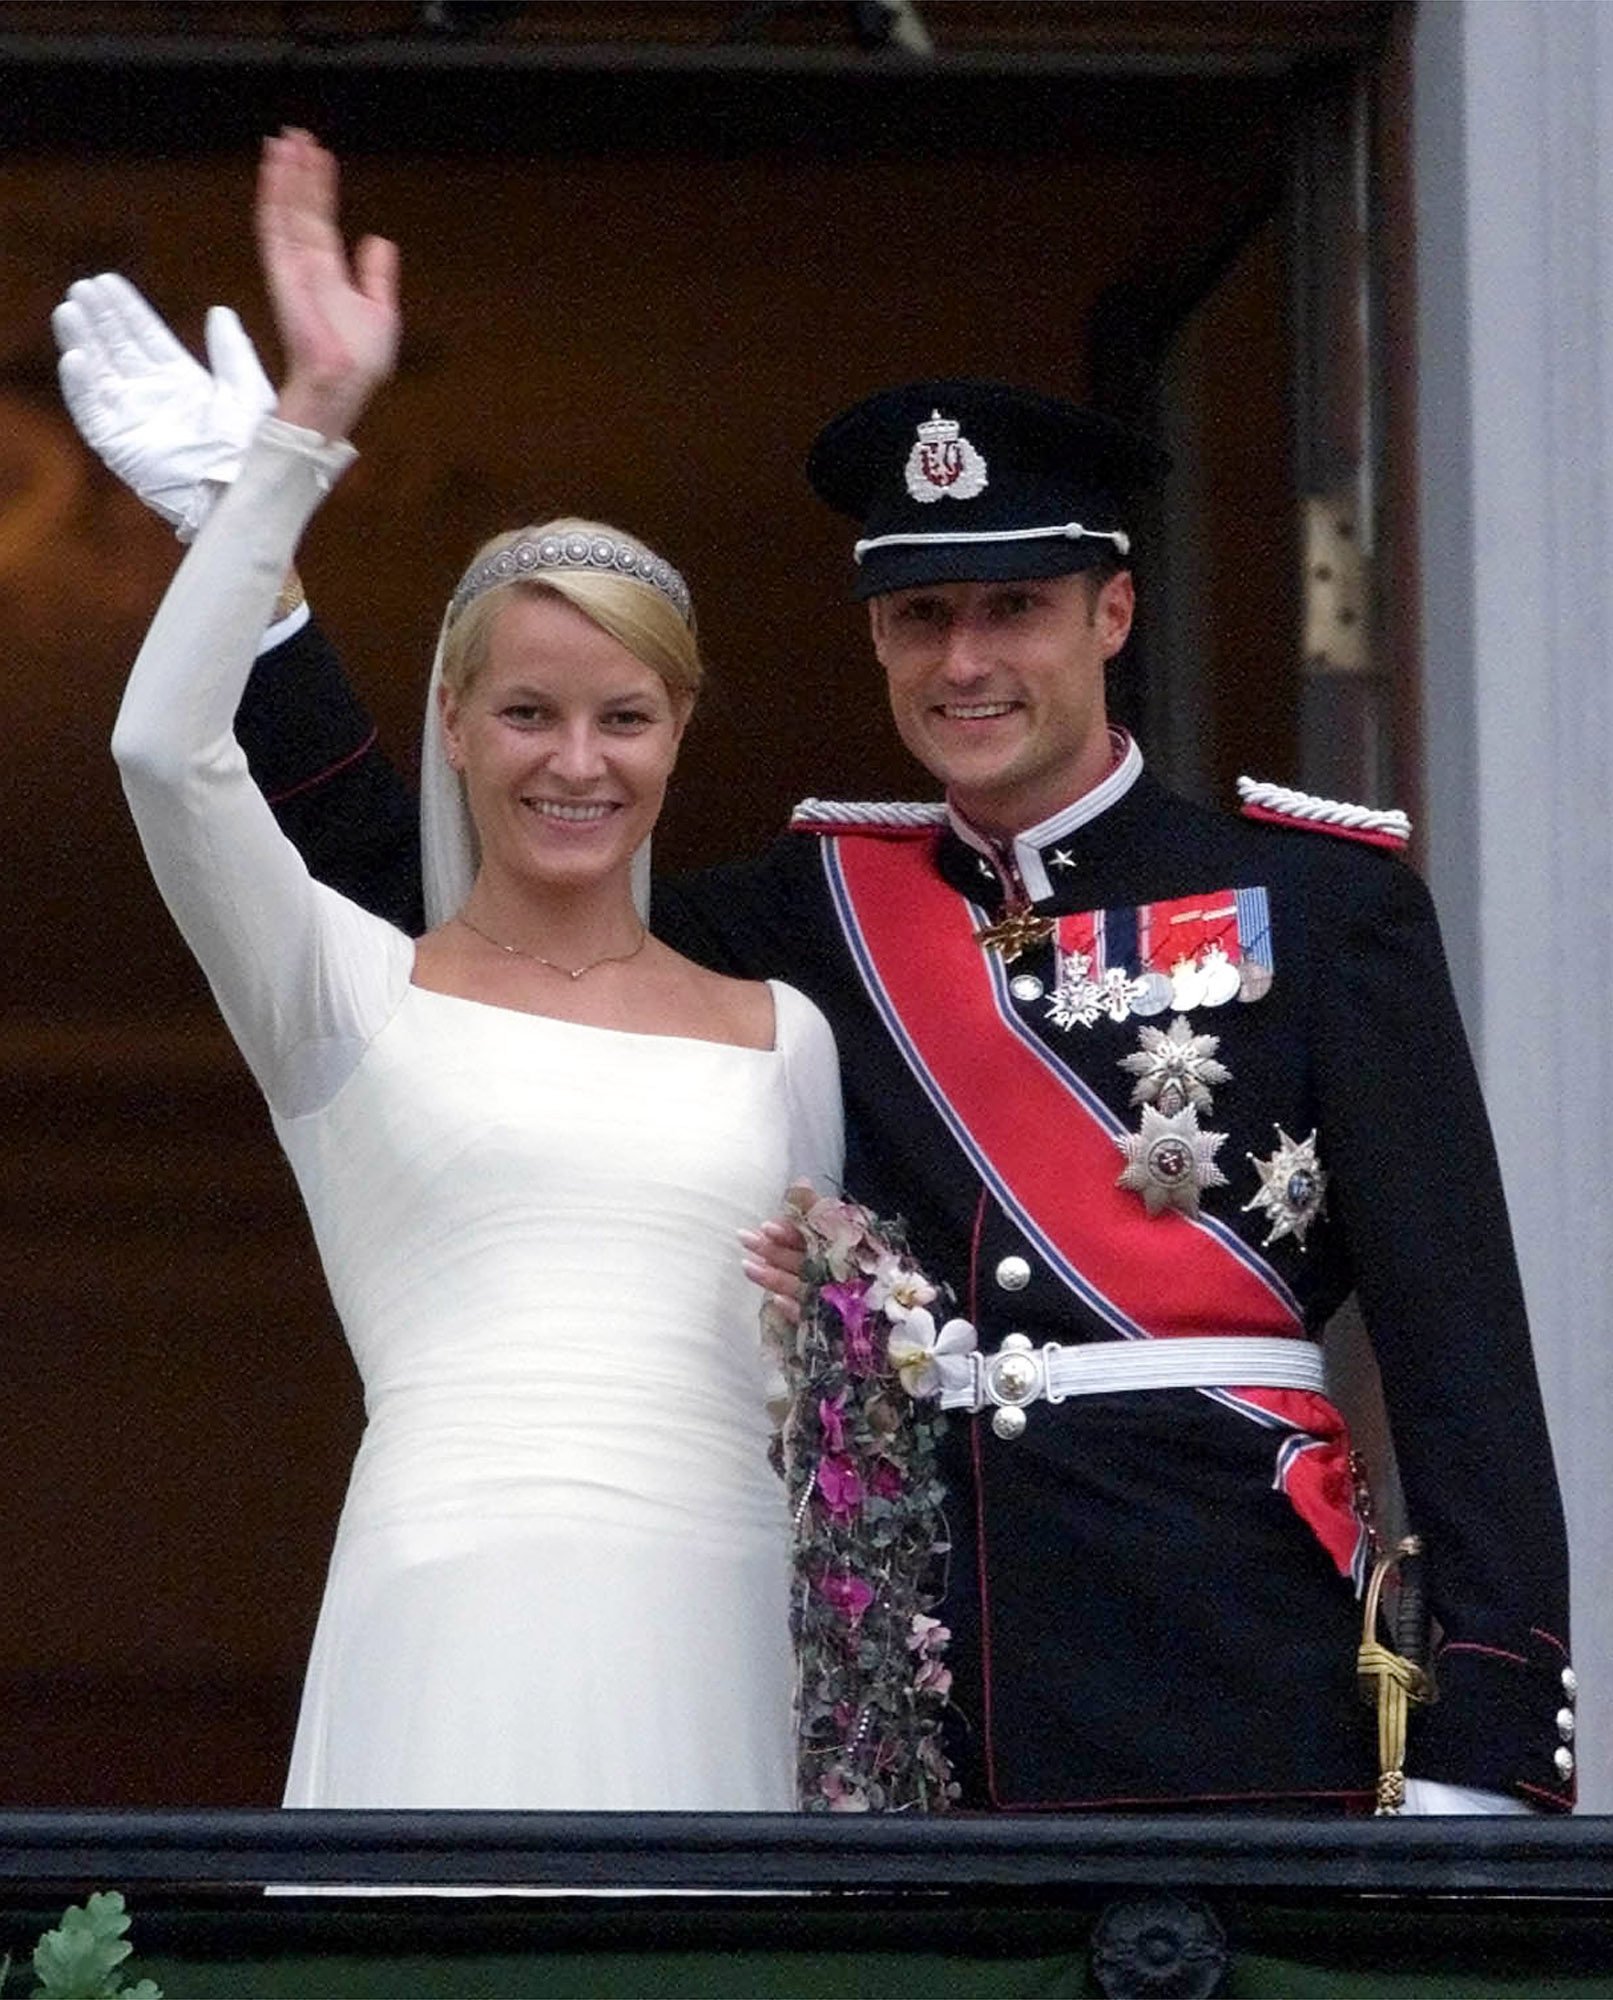 Norway’s Crown Prince Haakon and his bride Crown Princess Mette-Marit, wave  from the balcony of the Royal Palace in Oslo after their wedding ceremony Saturday Aug. 25, 2001. (AP Photo/Dave Caulkin)